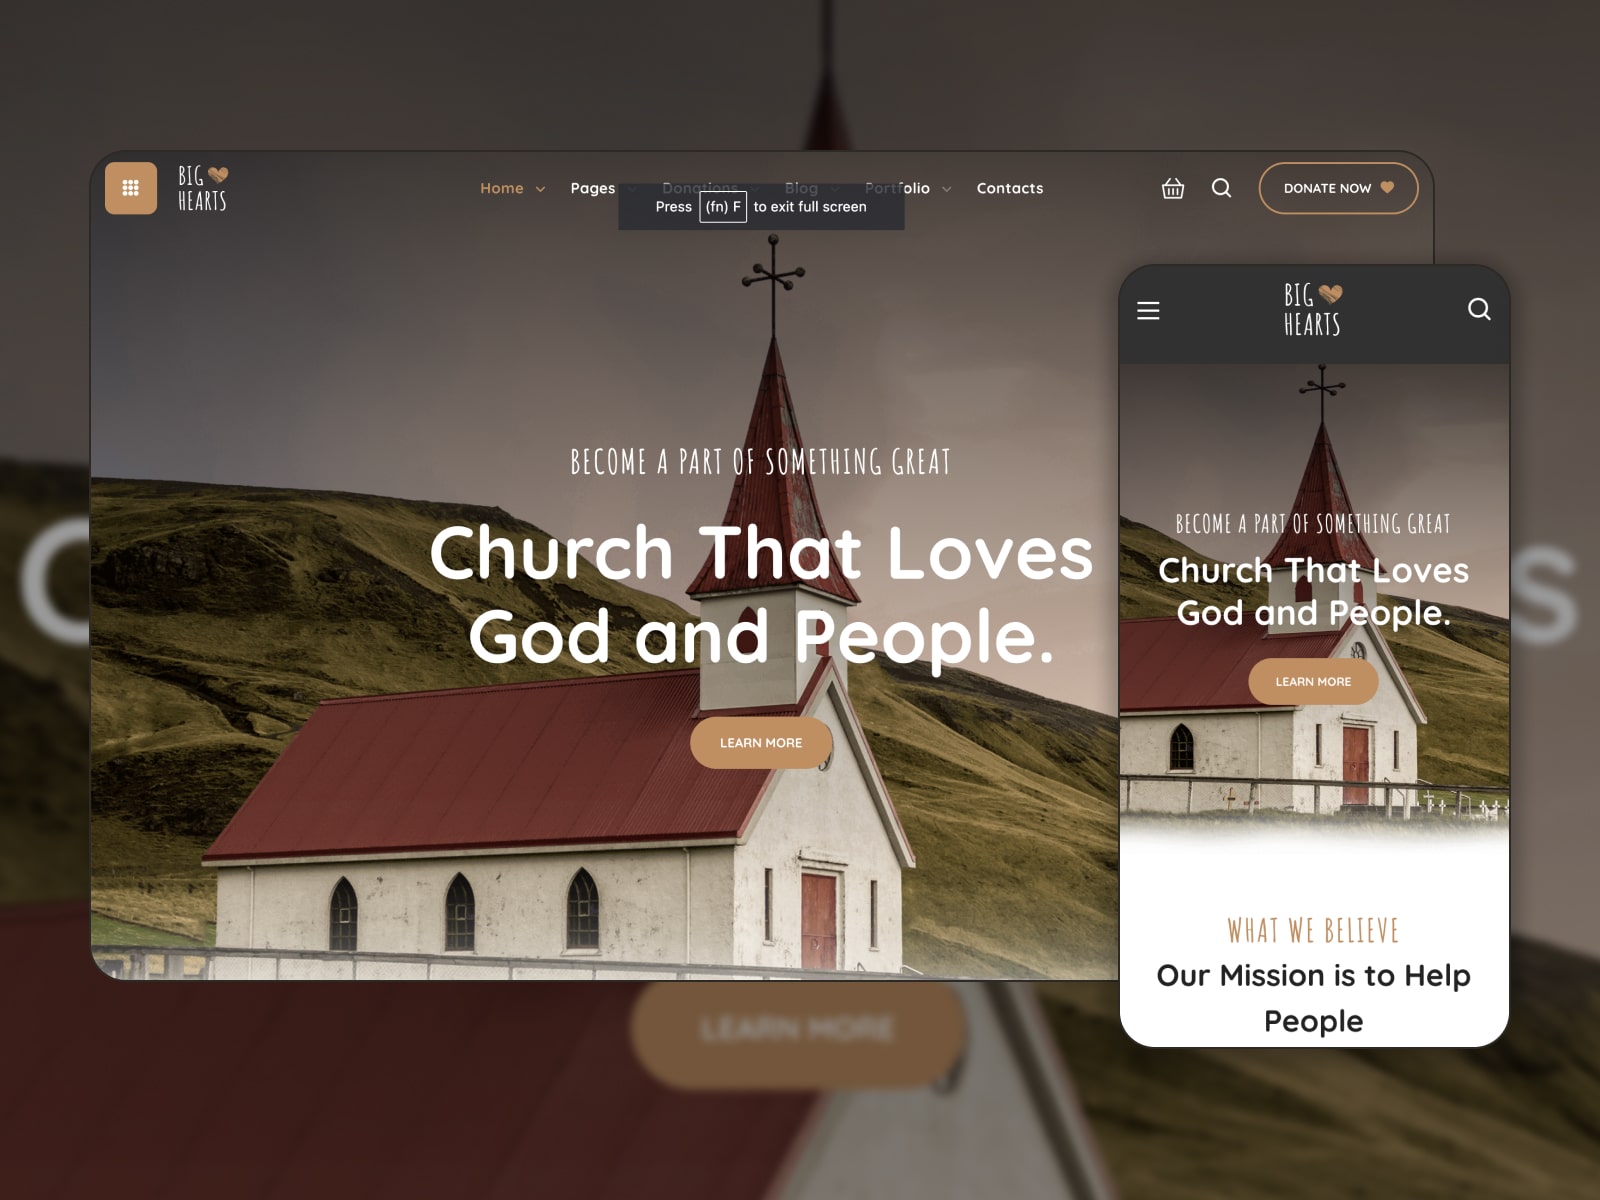 Collage of the Bighearts church website built with WordPress.